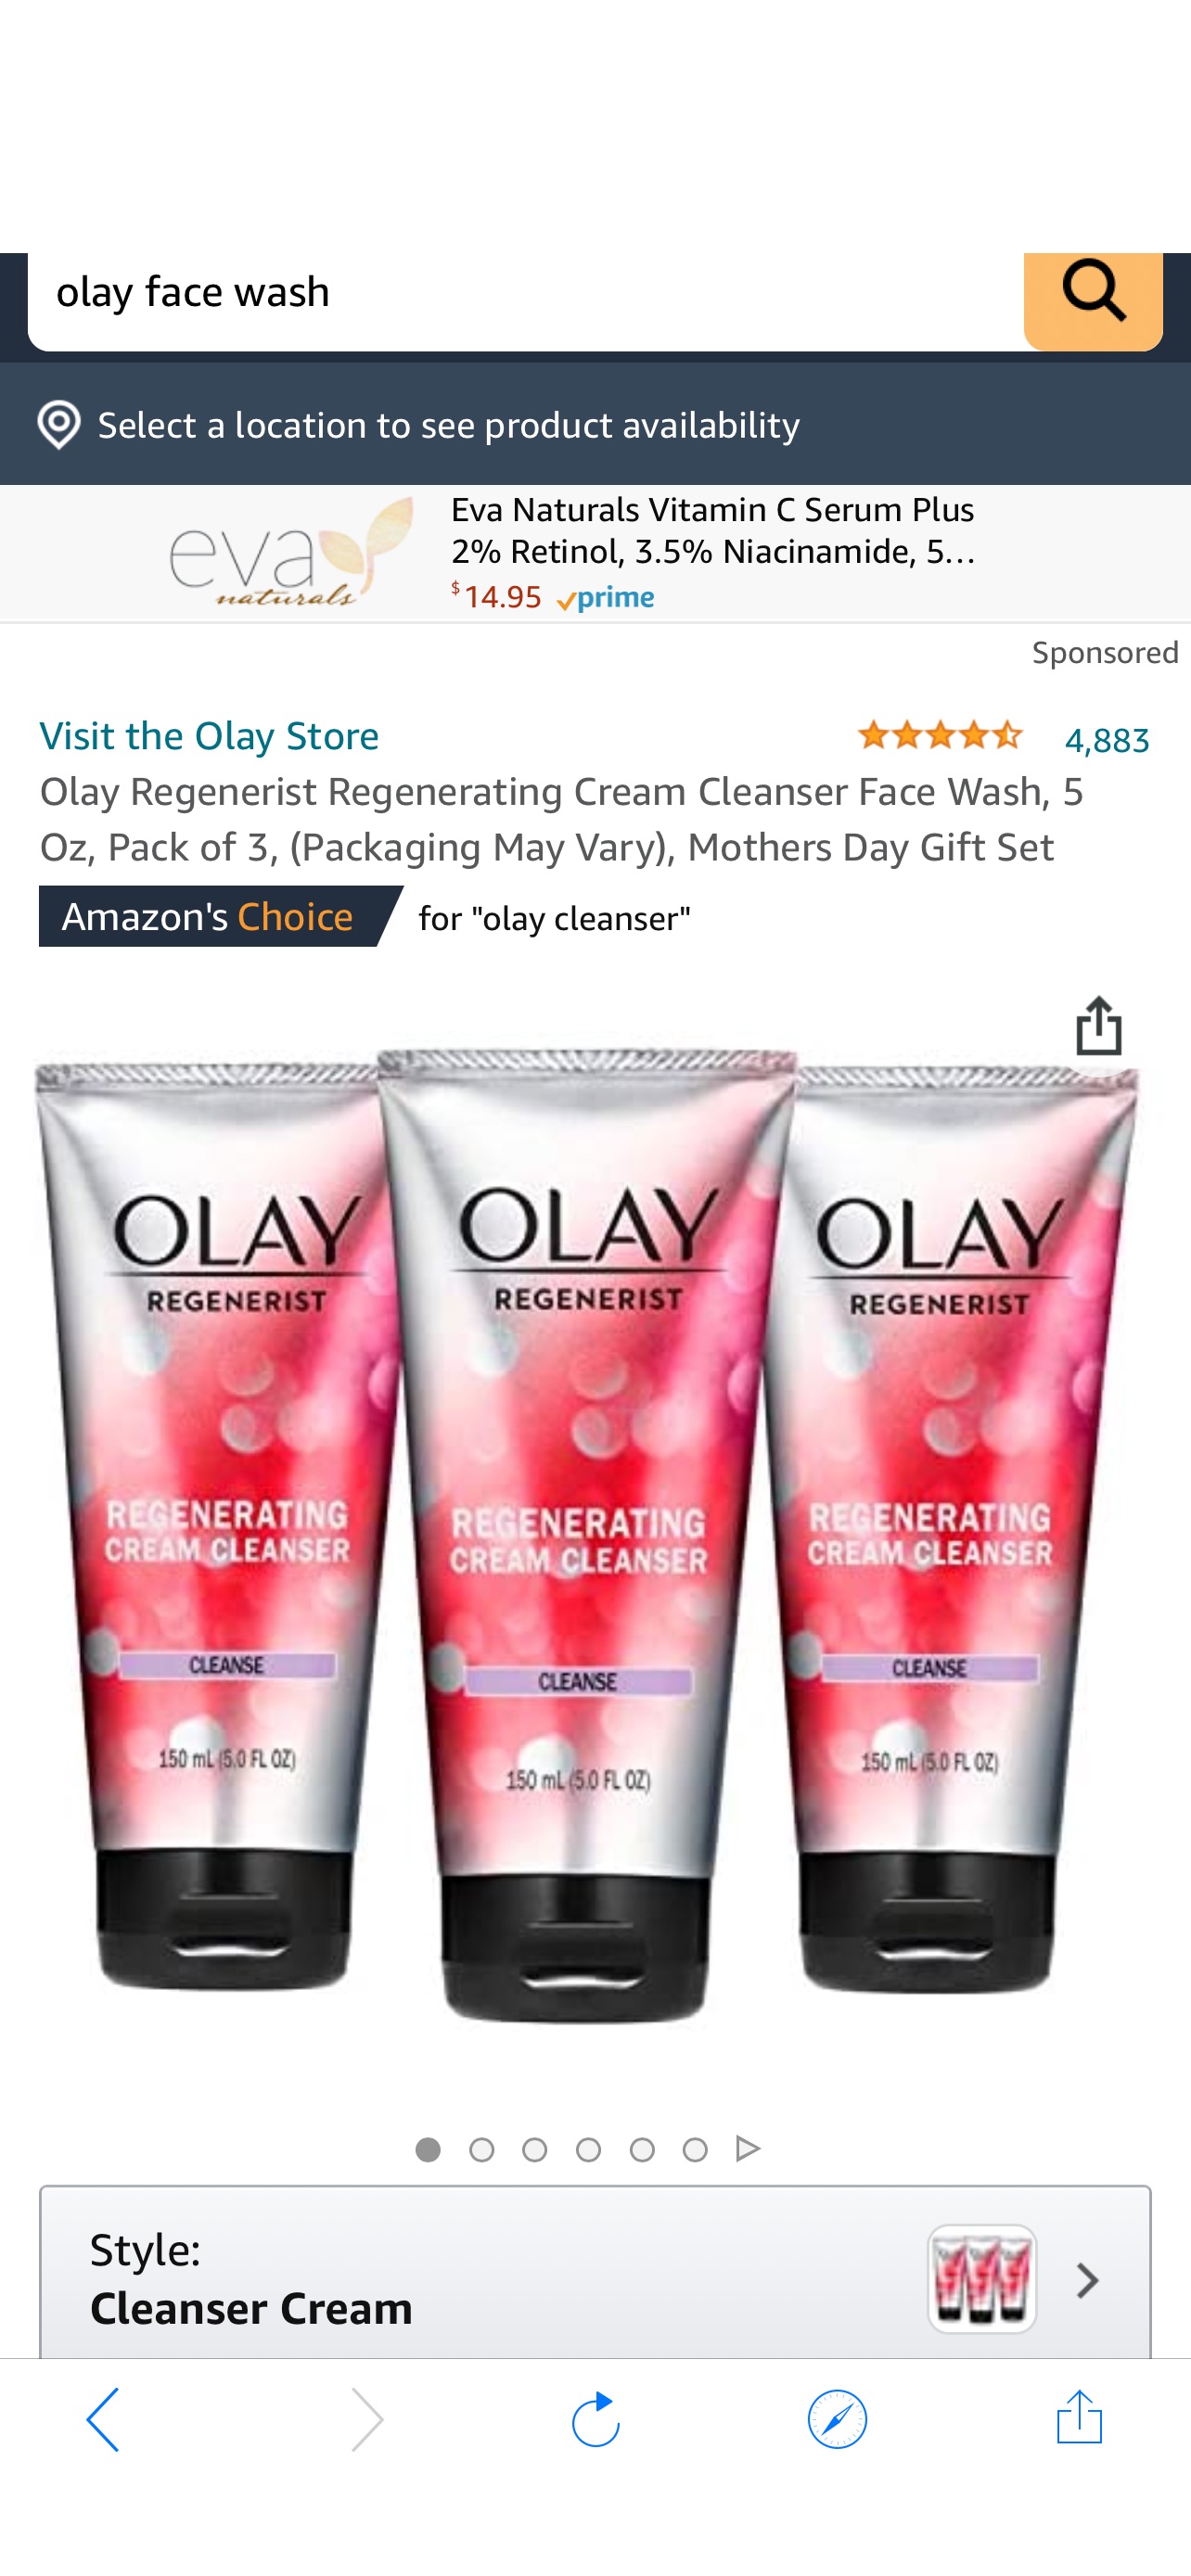 Amazon.com: Olay Regenerist Regenerating Cream Cleanser Face Wash, 5 Oz, Pack of 3, (Packaging May Vary), Mothers Day Gift Set: Beauty 玉兰油新生焕肤系列再生霜洗面奶